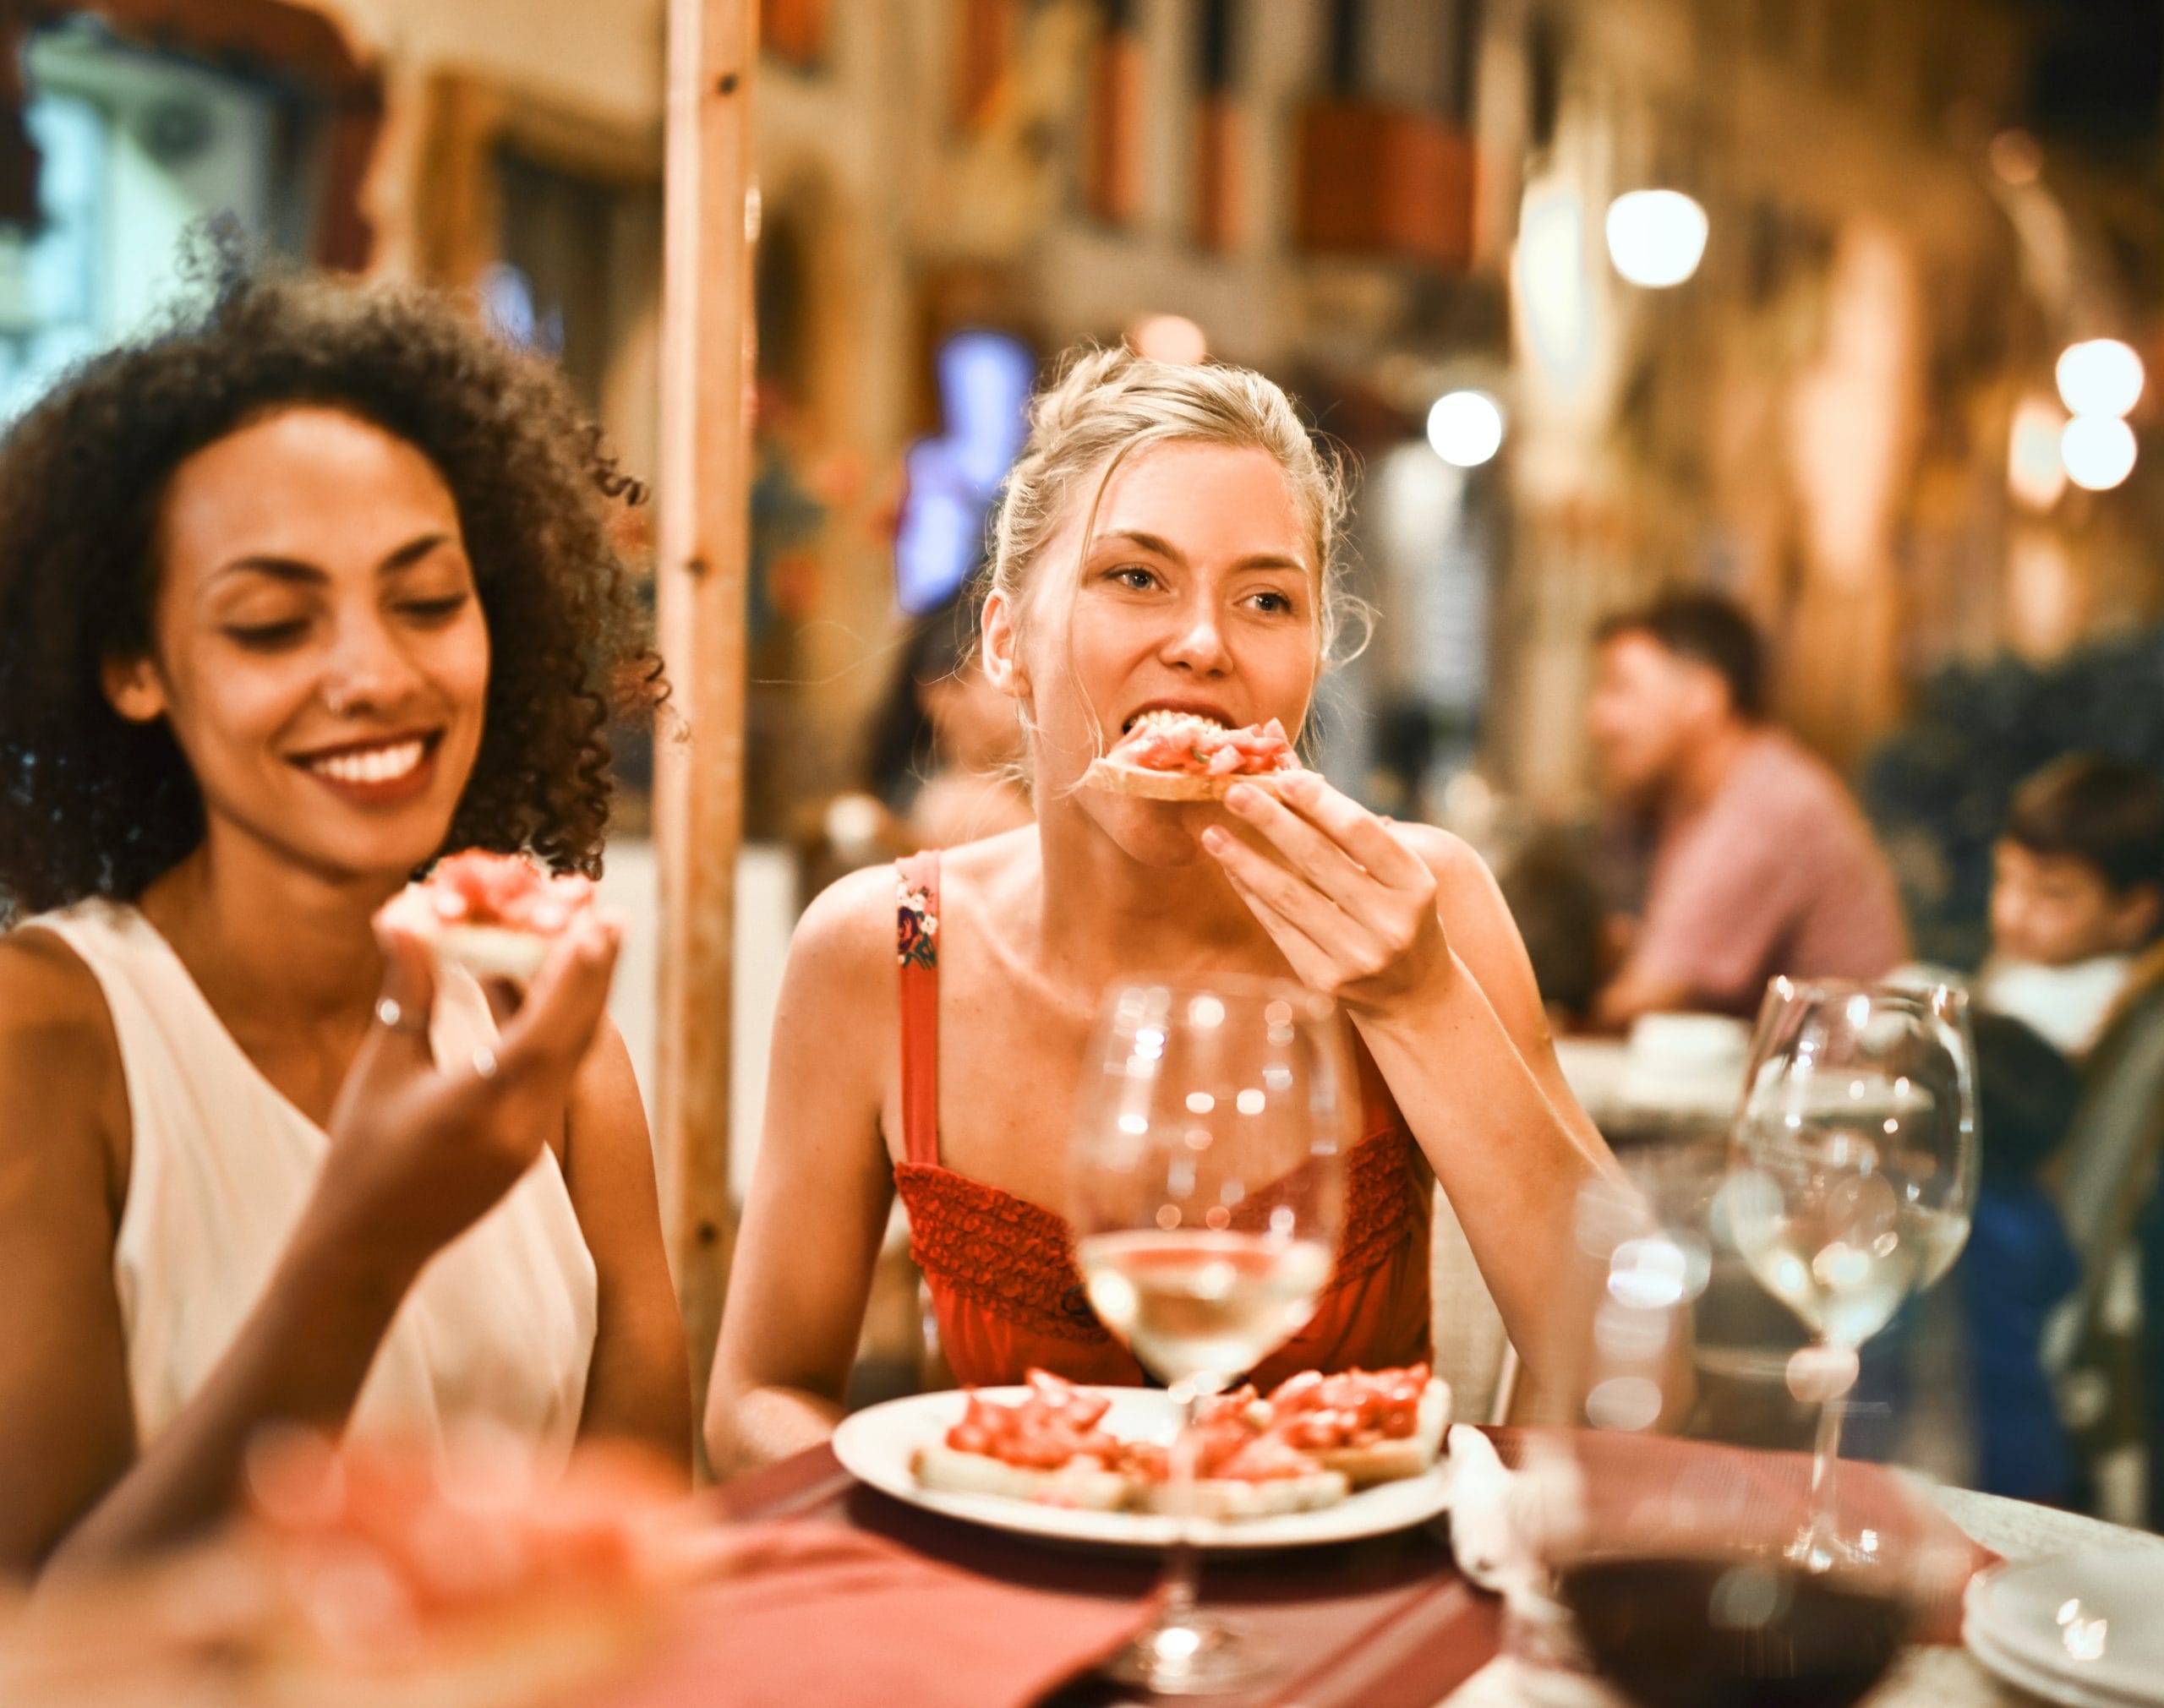 black woman eating at resteraunt socially with friend